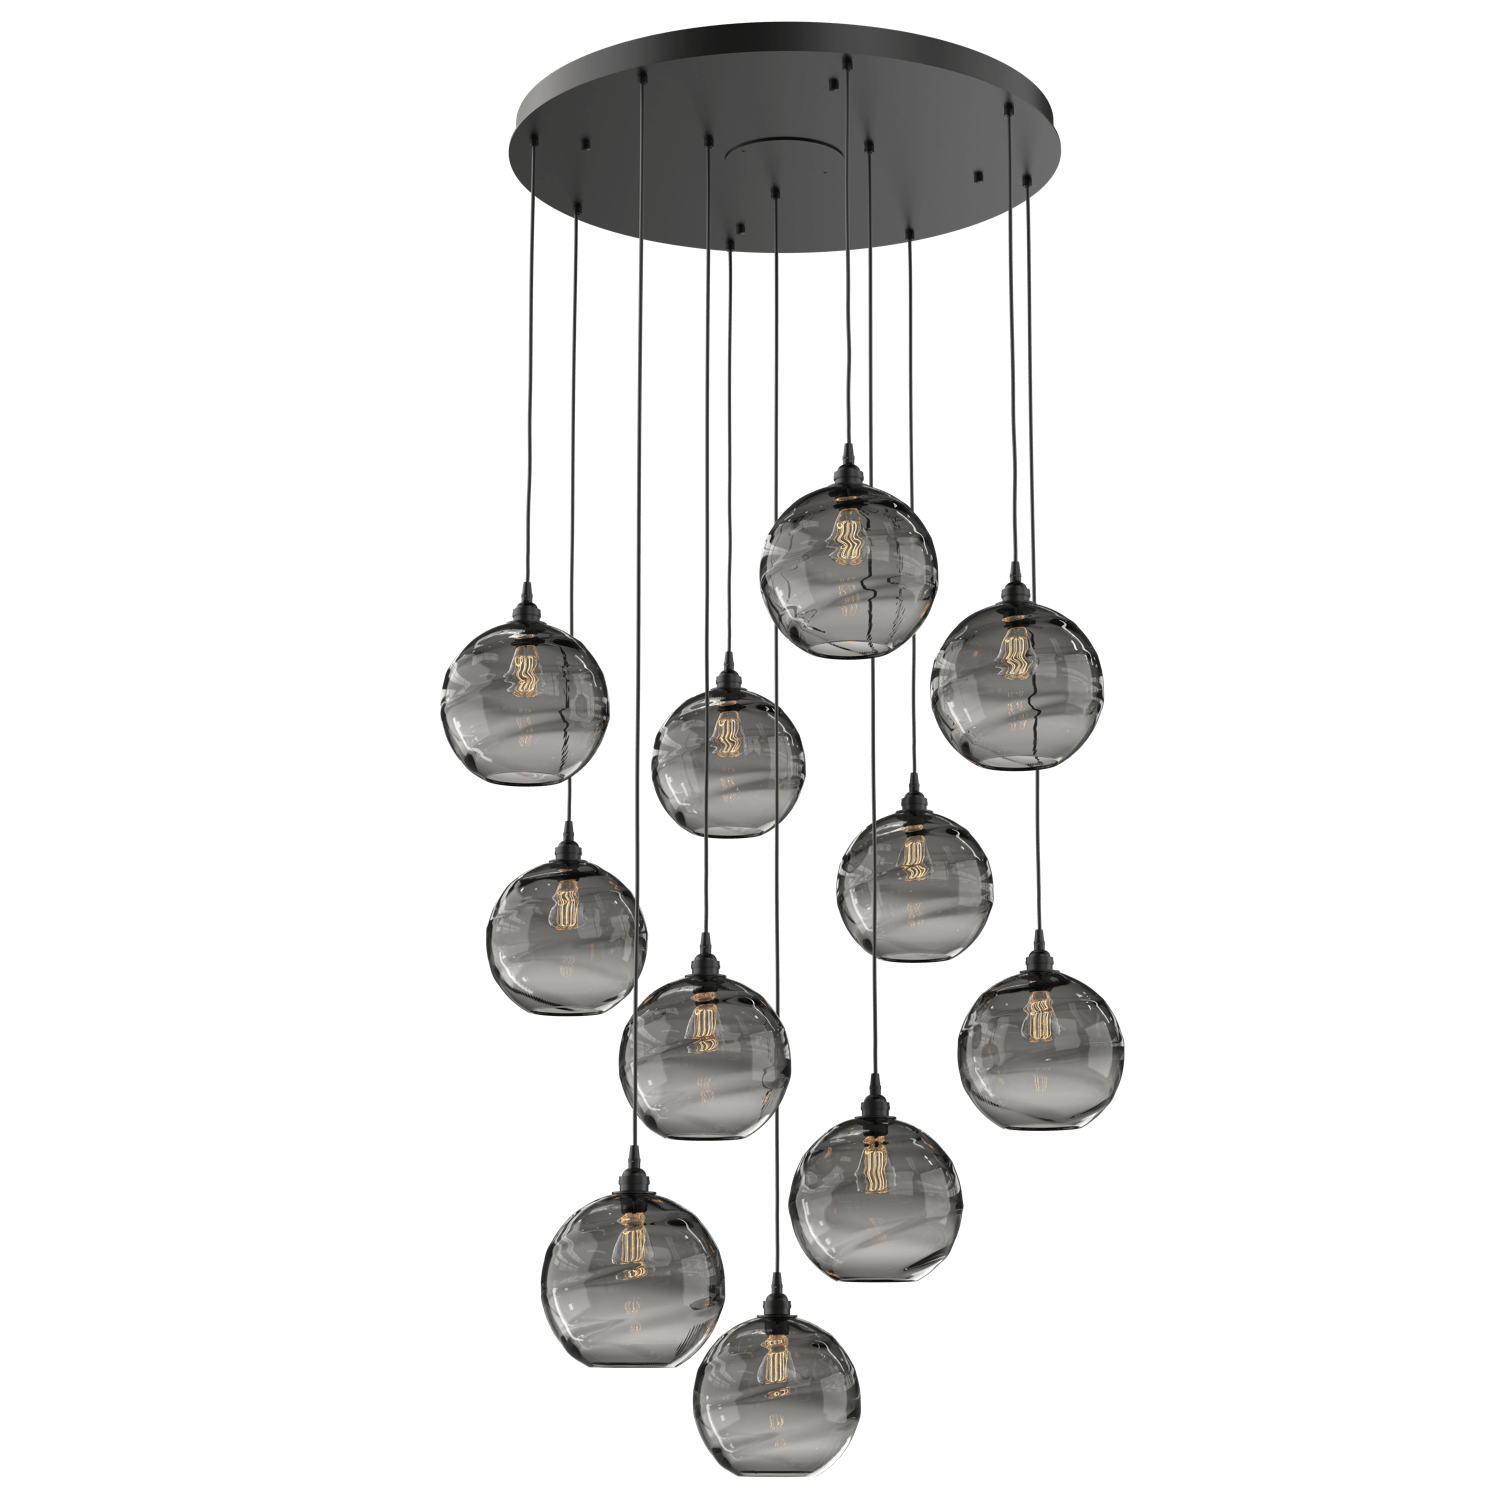 CHB0047-11-MB-OS-Hammerton-Studio-Optic-Blown-Glass-Terra-11-light-round-pendant-chandelier-with-matte-black-finish-and-optic-smoke-blown-glass-shades-and-incandescent-lamping